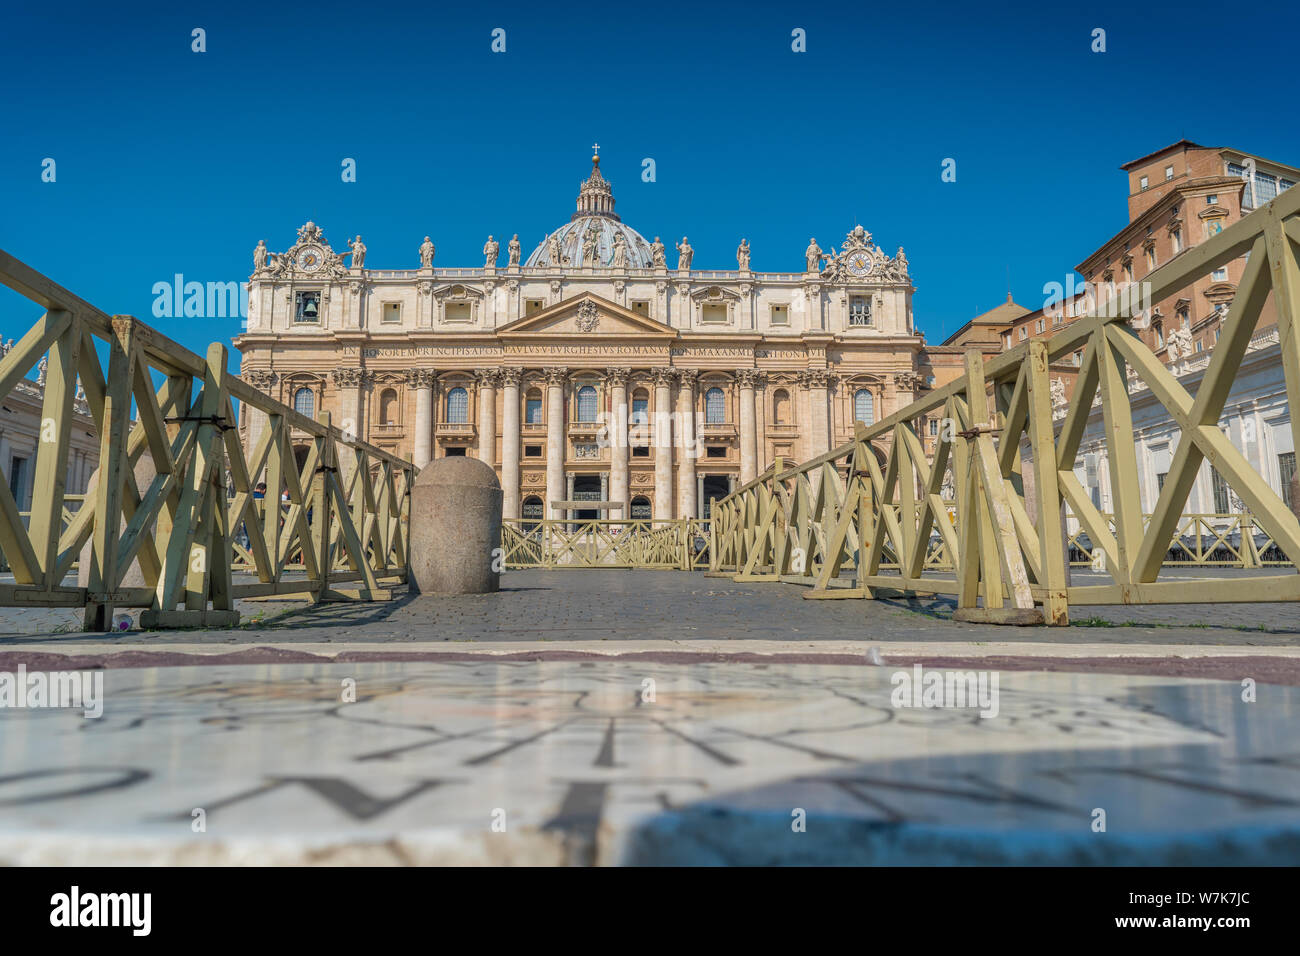 The Papal Basilica of St. Peter in the Vaticanv Stock Photo